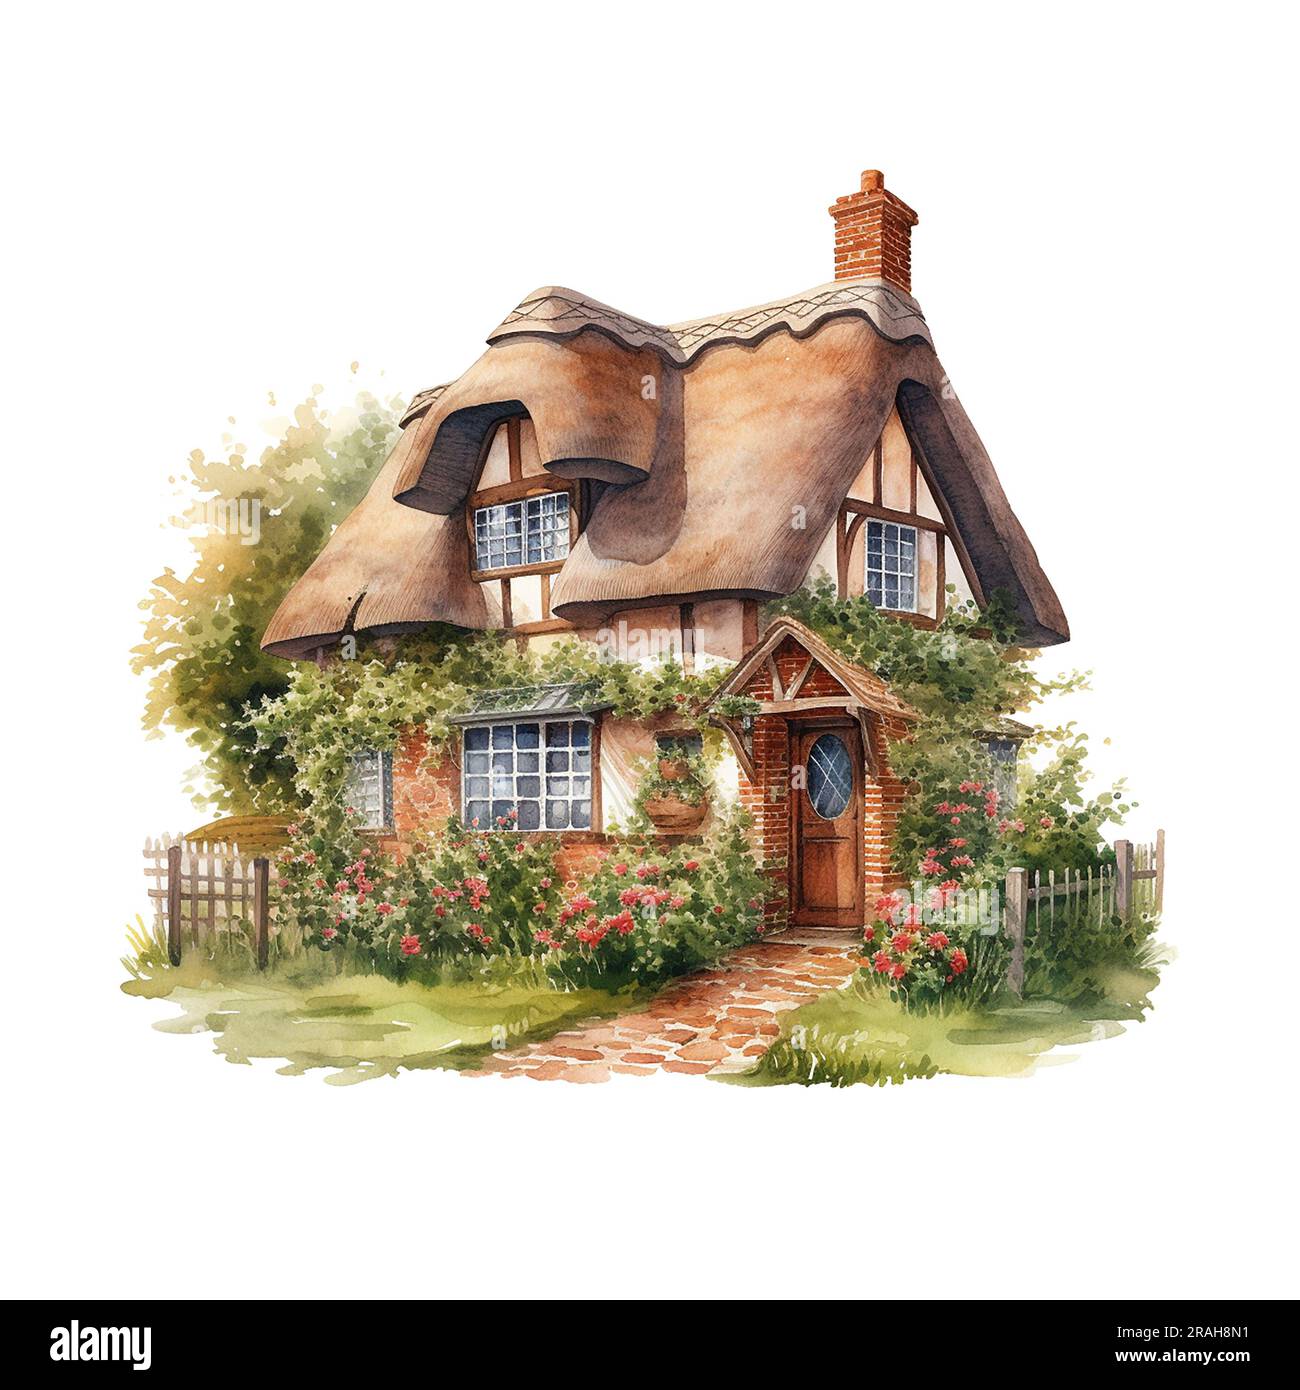 Hand drawn illustration of traditional English village house isolated on white background. Watercolor cozy house with thatched roof, plants and sky. Stock Photo